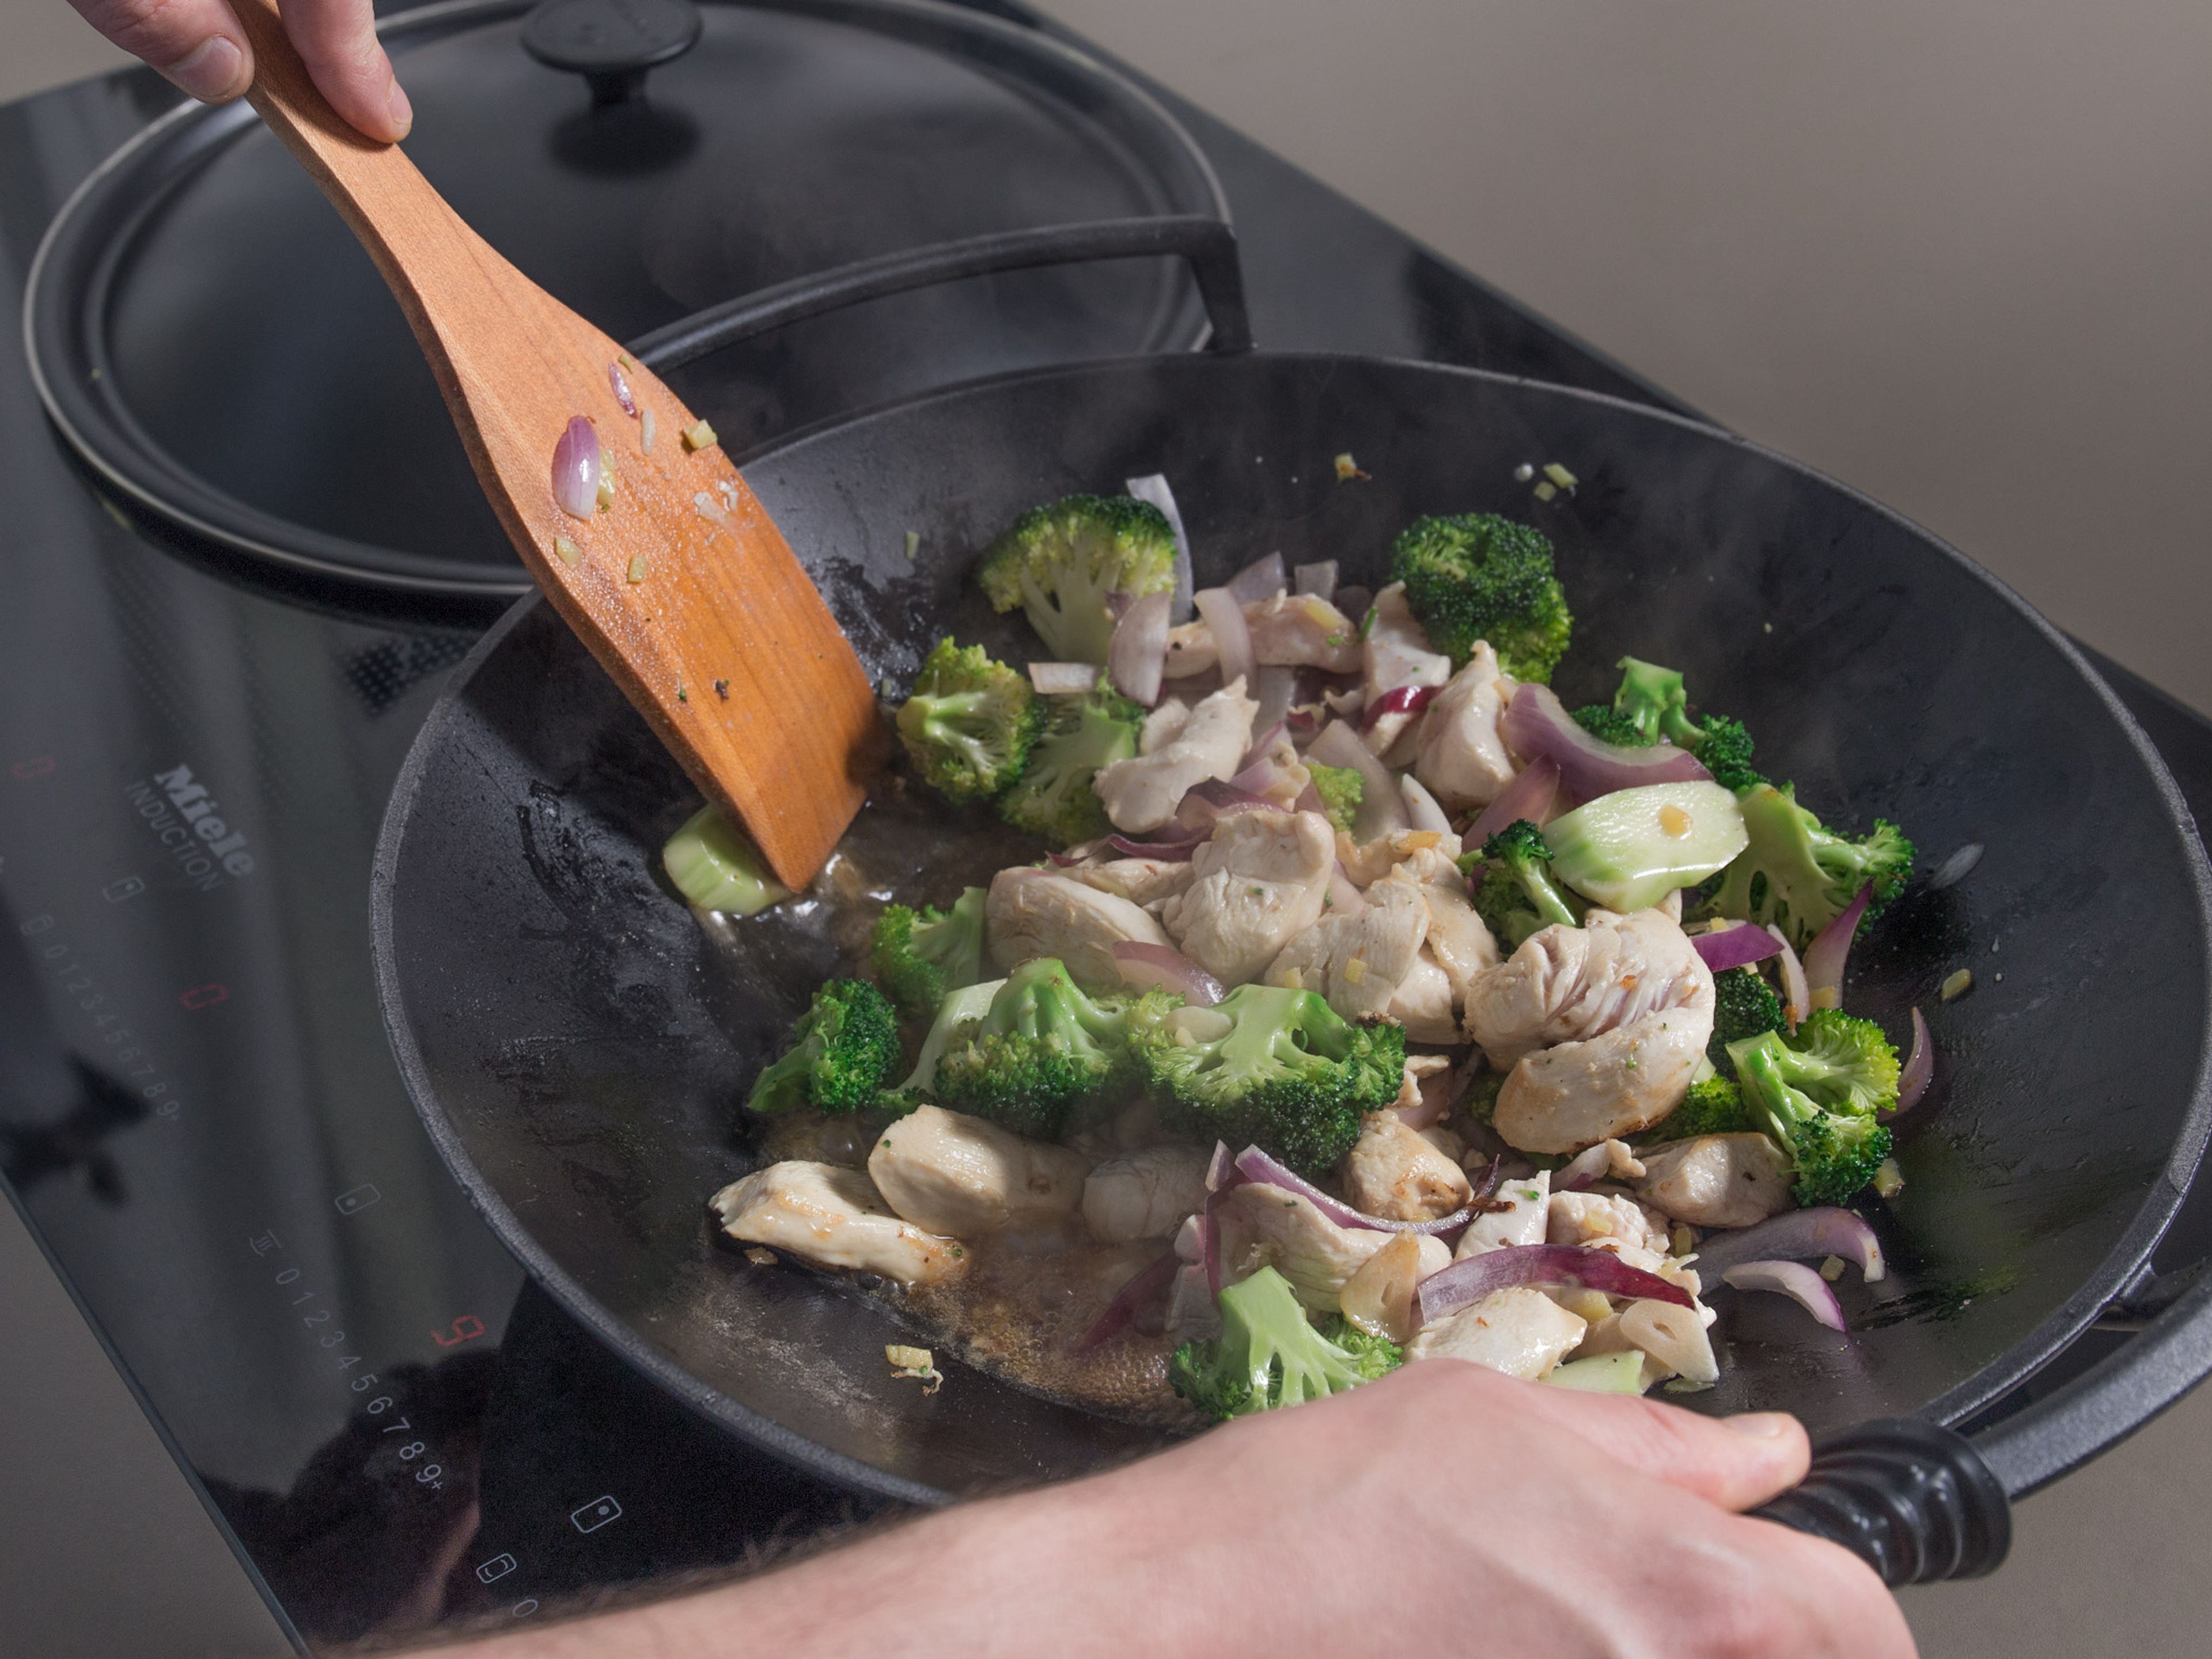 Heat peanut oil in wok and sauté garlic and ginger for approx. 2 min. Add chicken breast, onion, and broccoli and fry for approx. 3 – 5 min. Add chicken stock mixture and let simmer for approx. 3 – 5 min. Season with pepper. Add toasted peanuts, green onion, and cilantro to wok, then remove from heat and stir to combine. Enjoy!